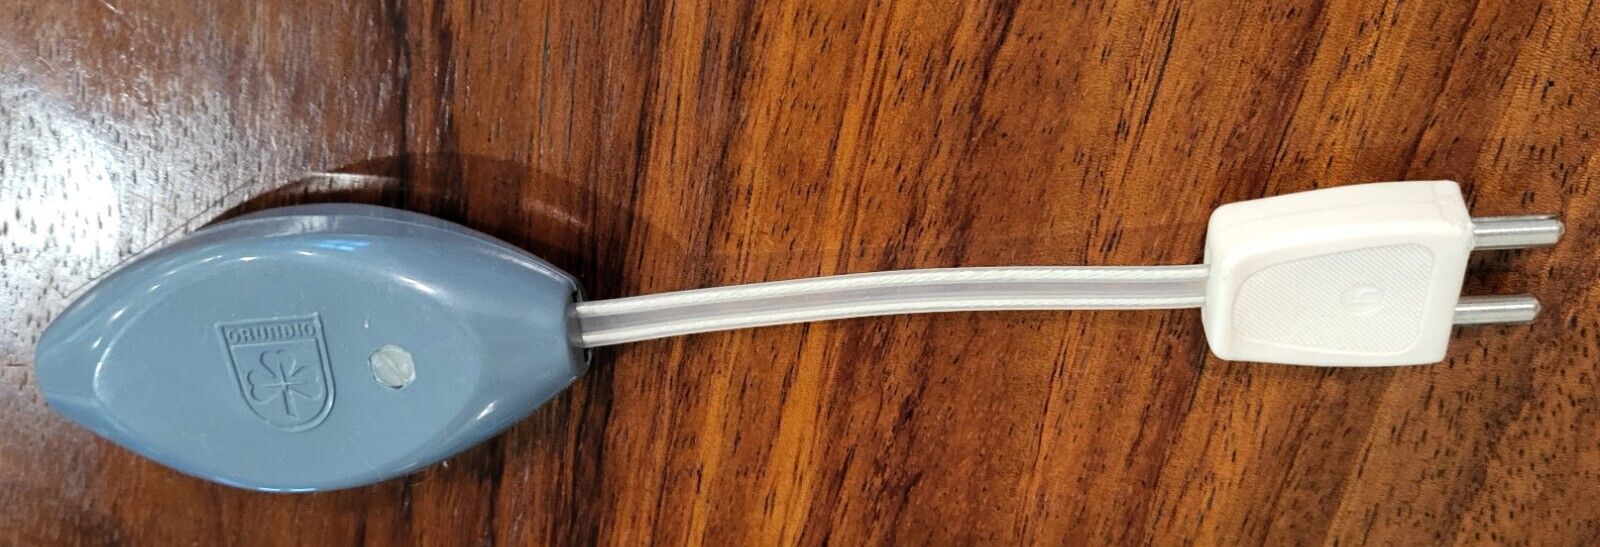 Rare Vintage Grundig Antenna, FM? Gray and White, Excellent Condition, Untested